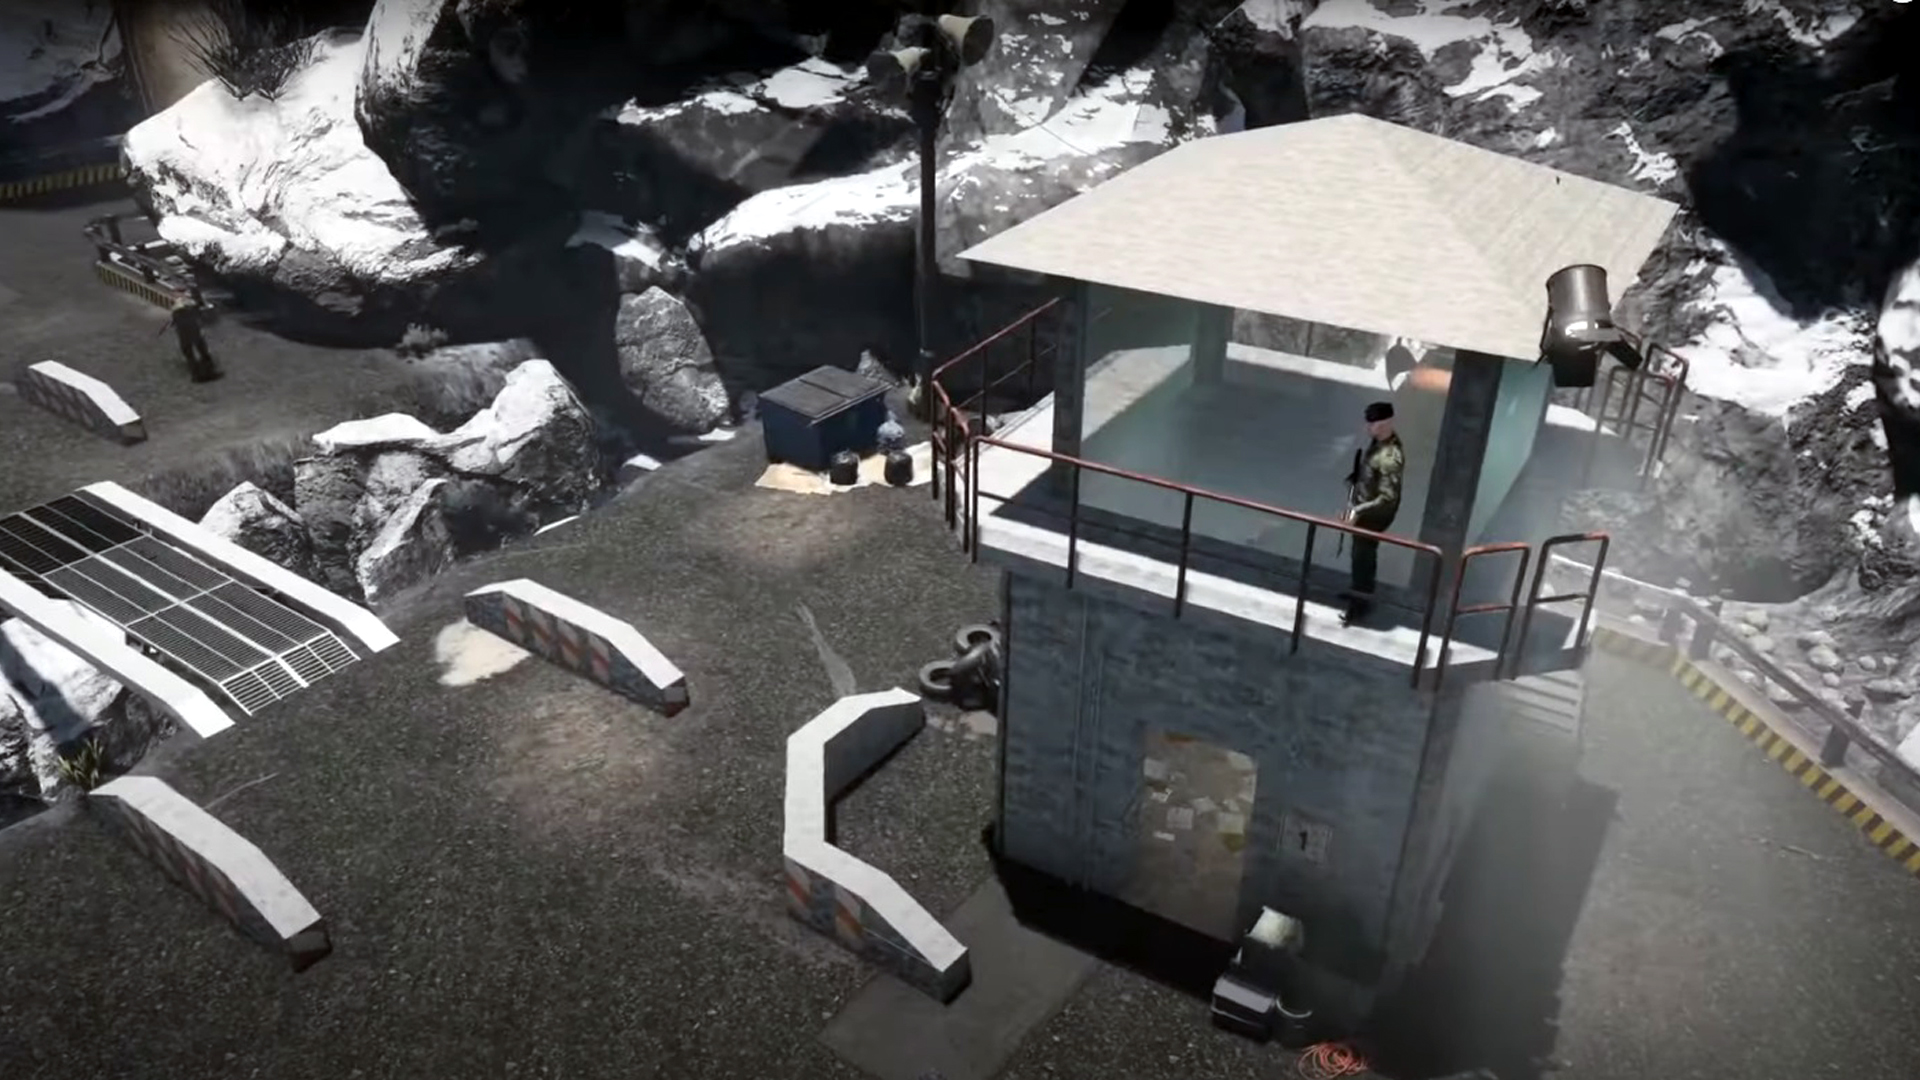 The fan-made 'GoldenEye' remake has returned to 'Far Cry 5